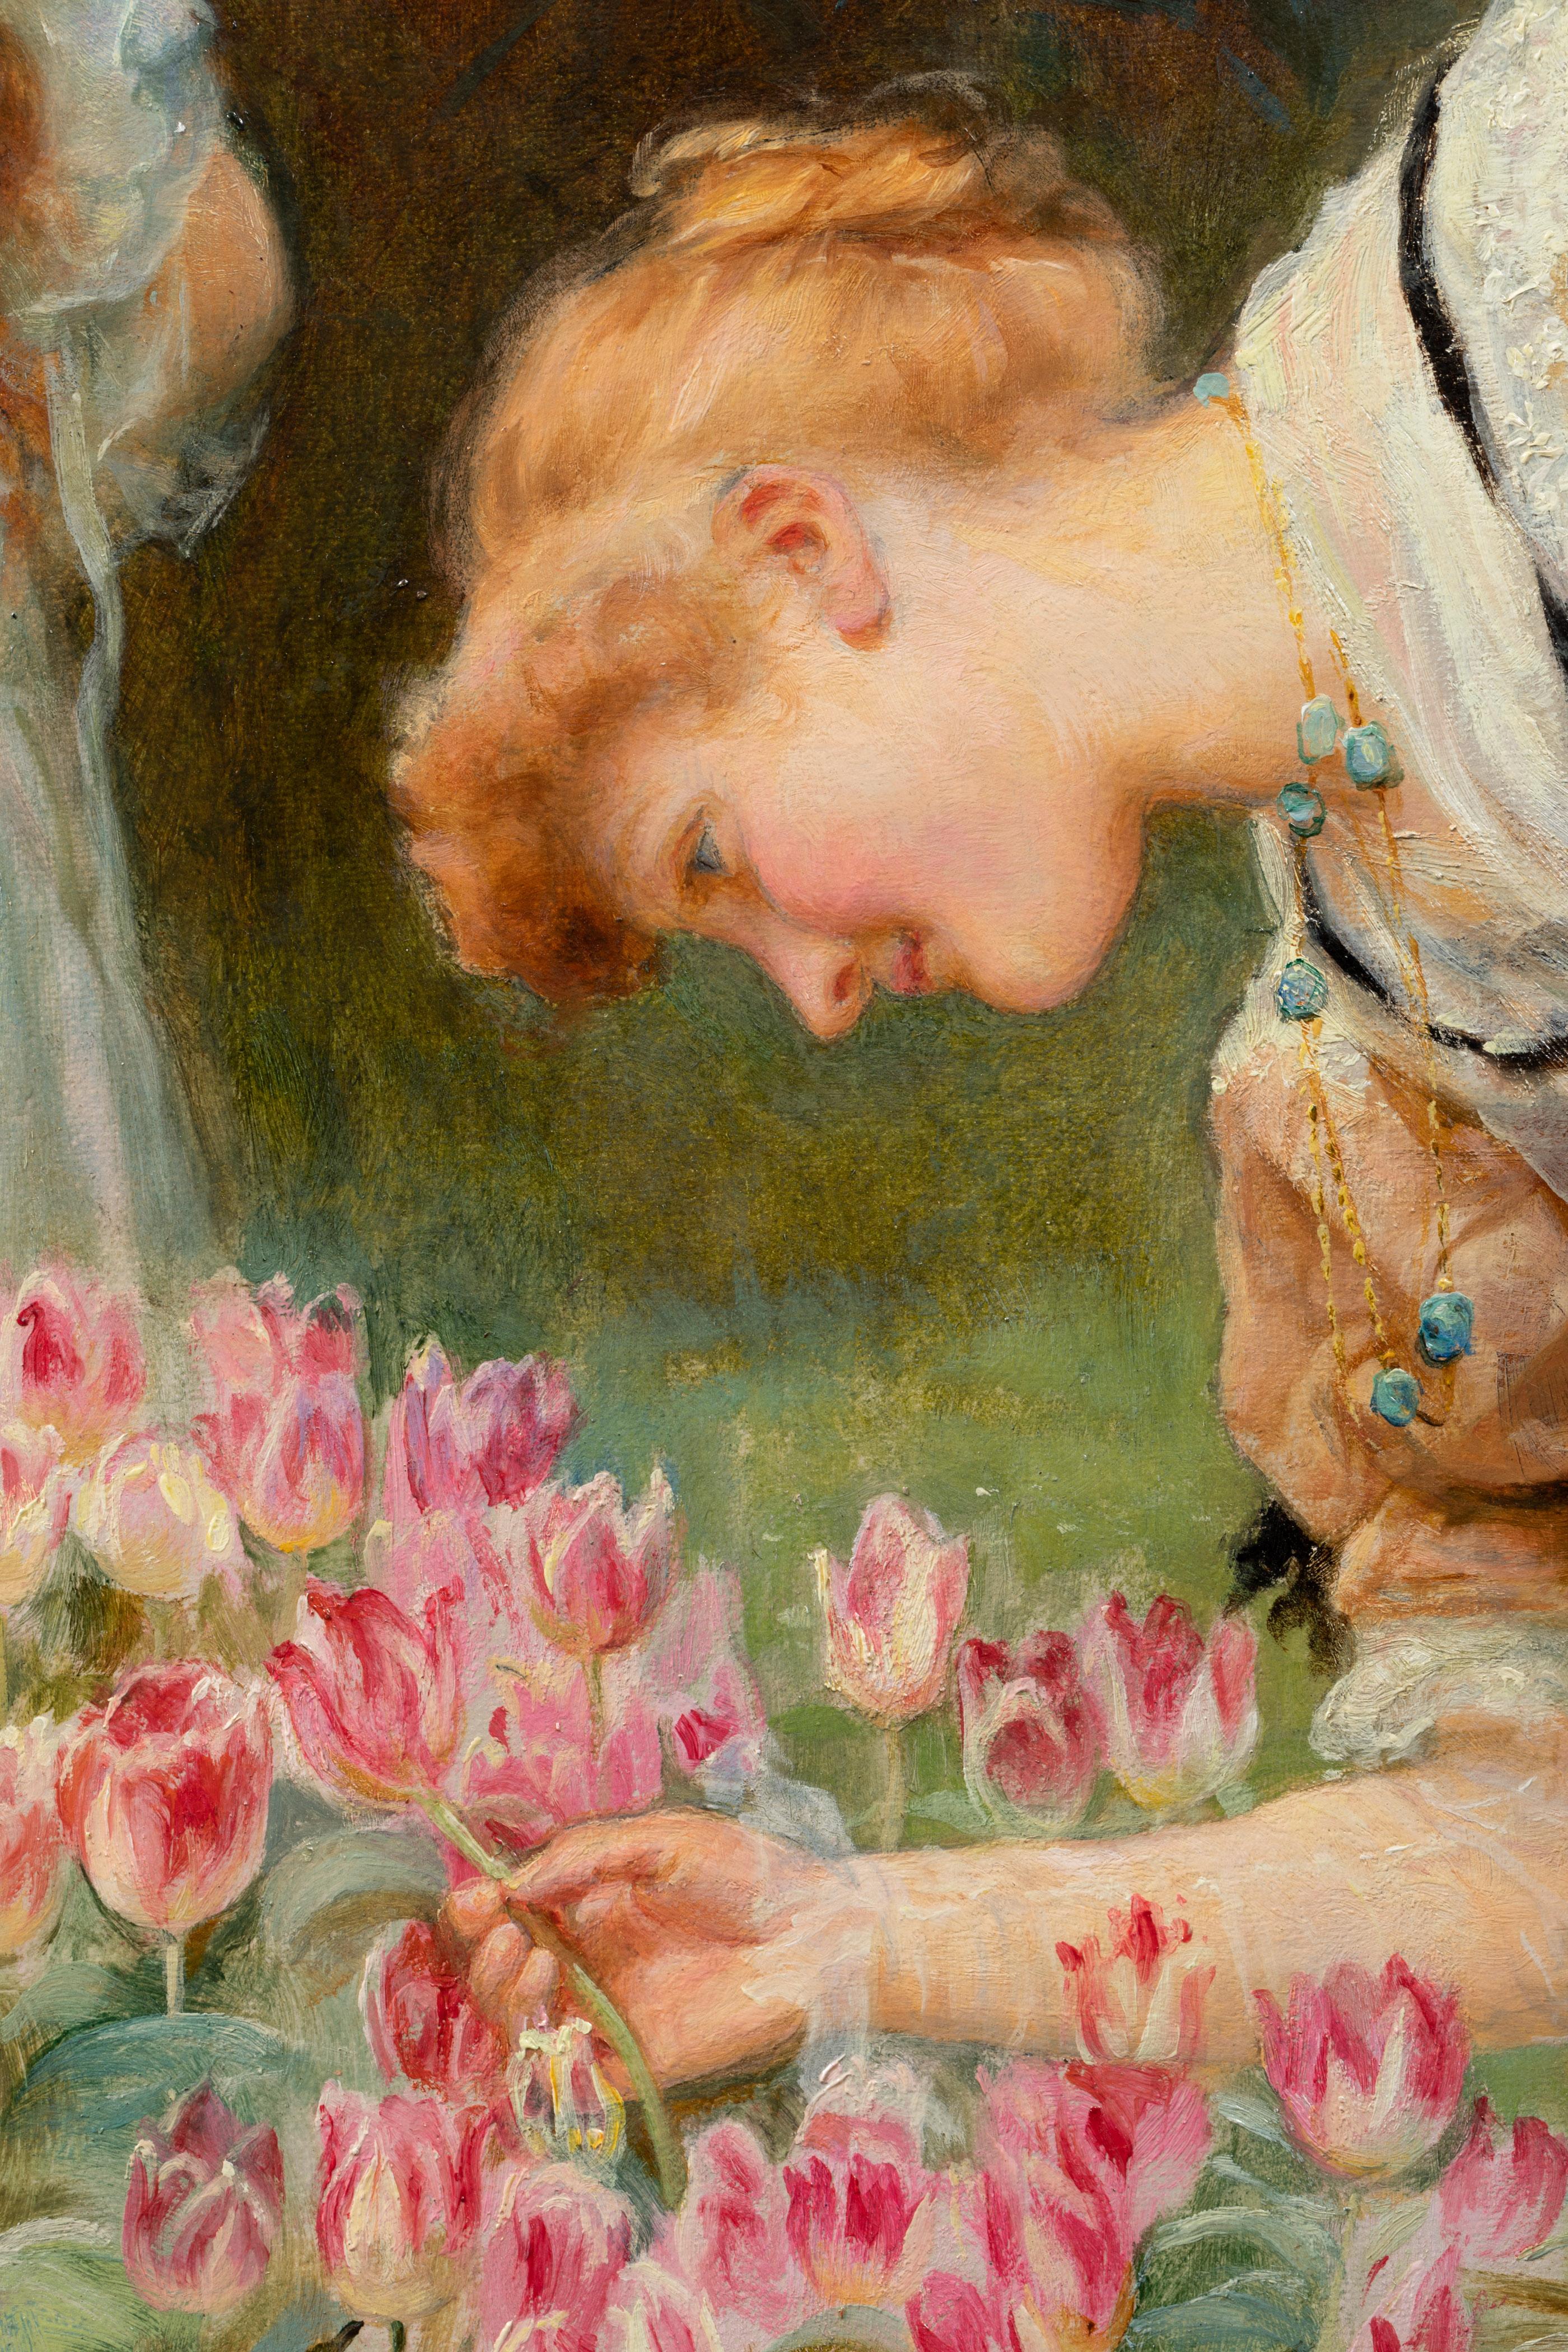 Oiled Frederick Morgan Picking Tulips, 19th Century Painting For Sale